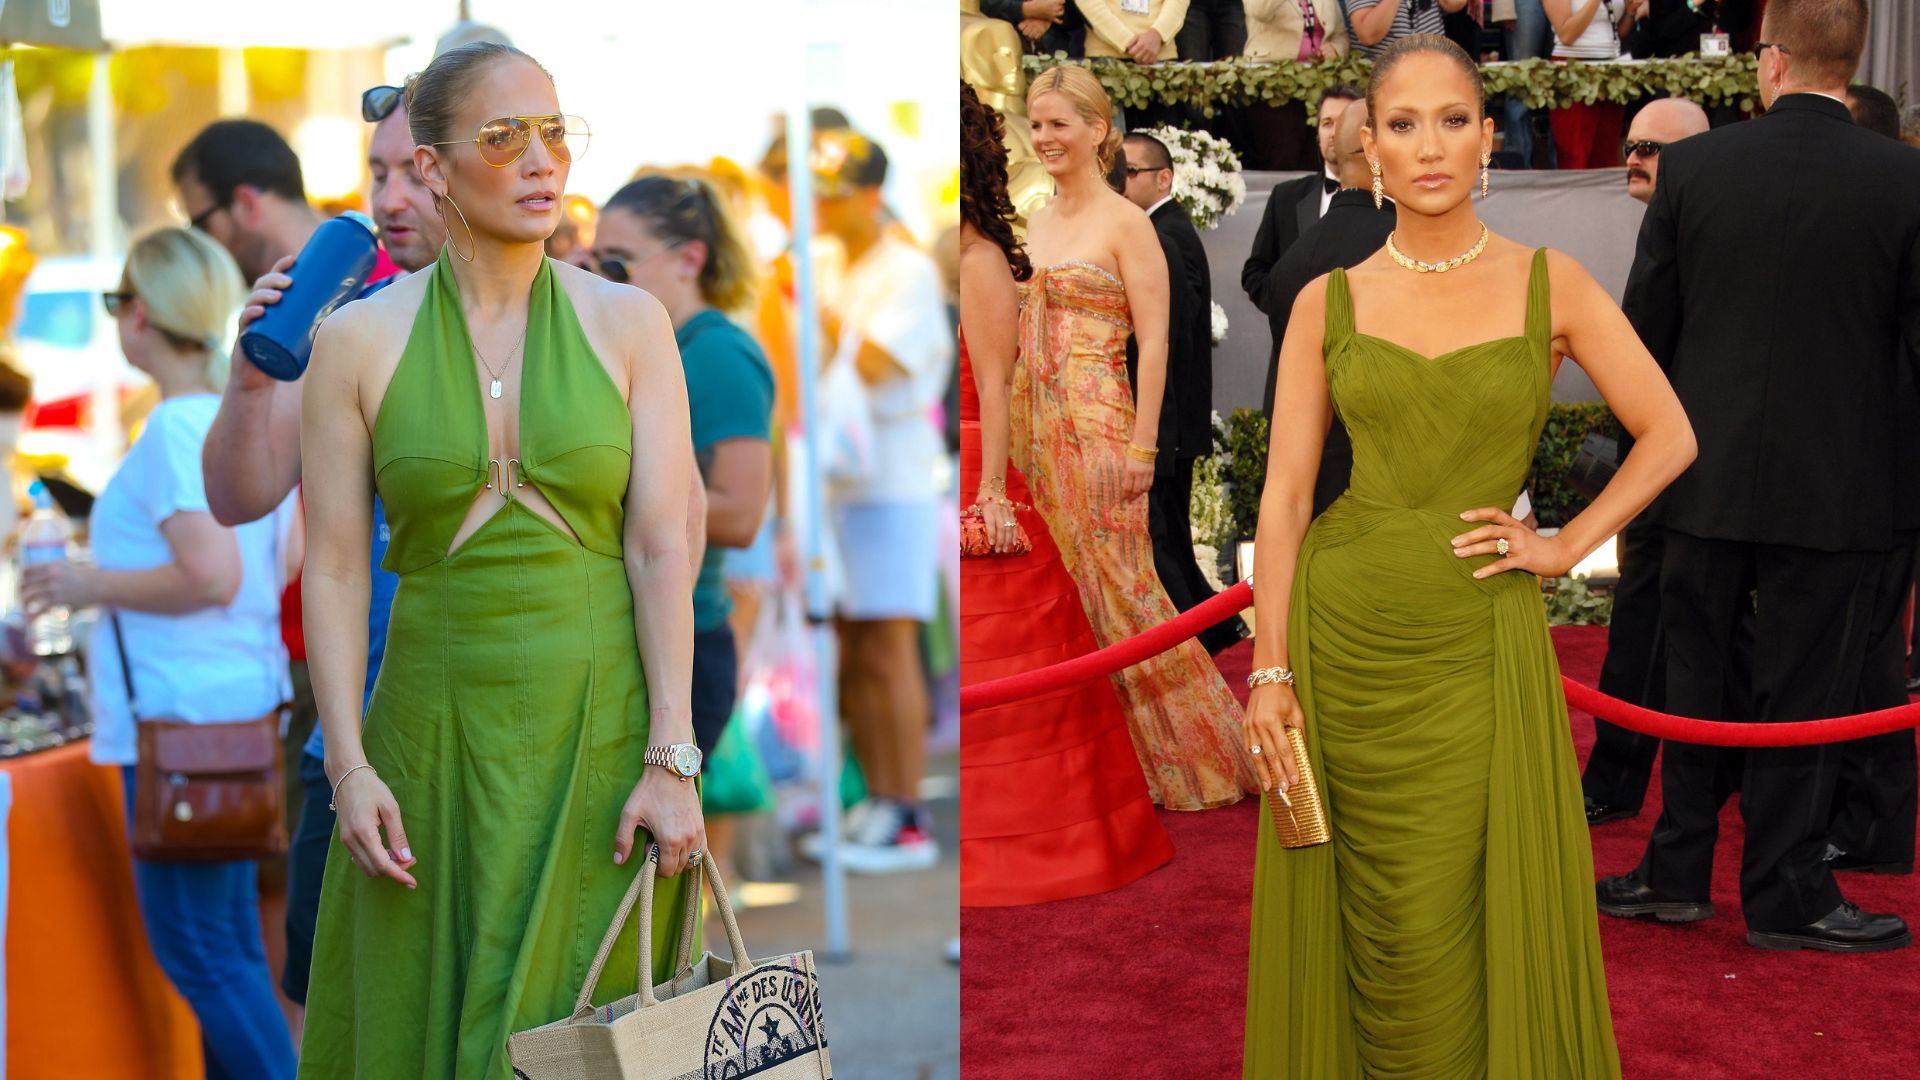 JLo sporting tones of green both on and off the red carpet